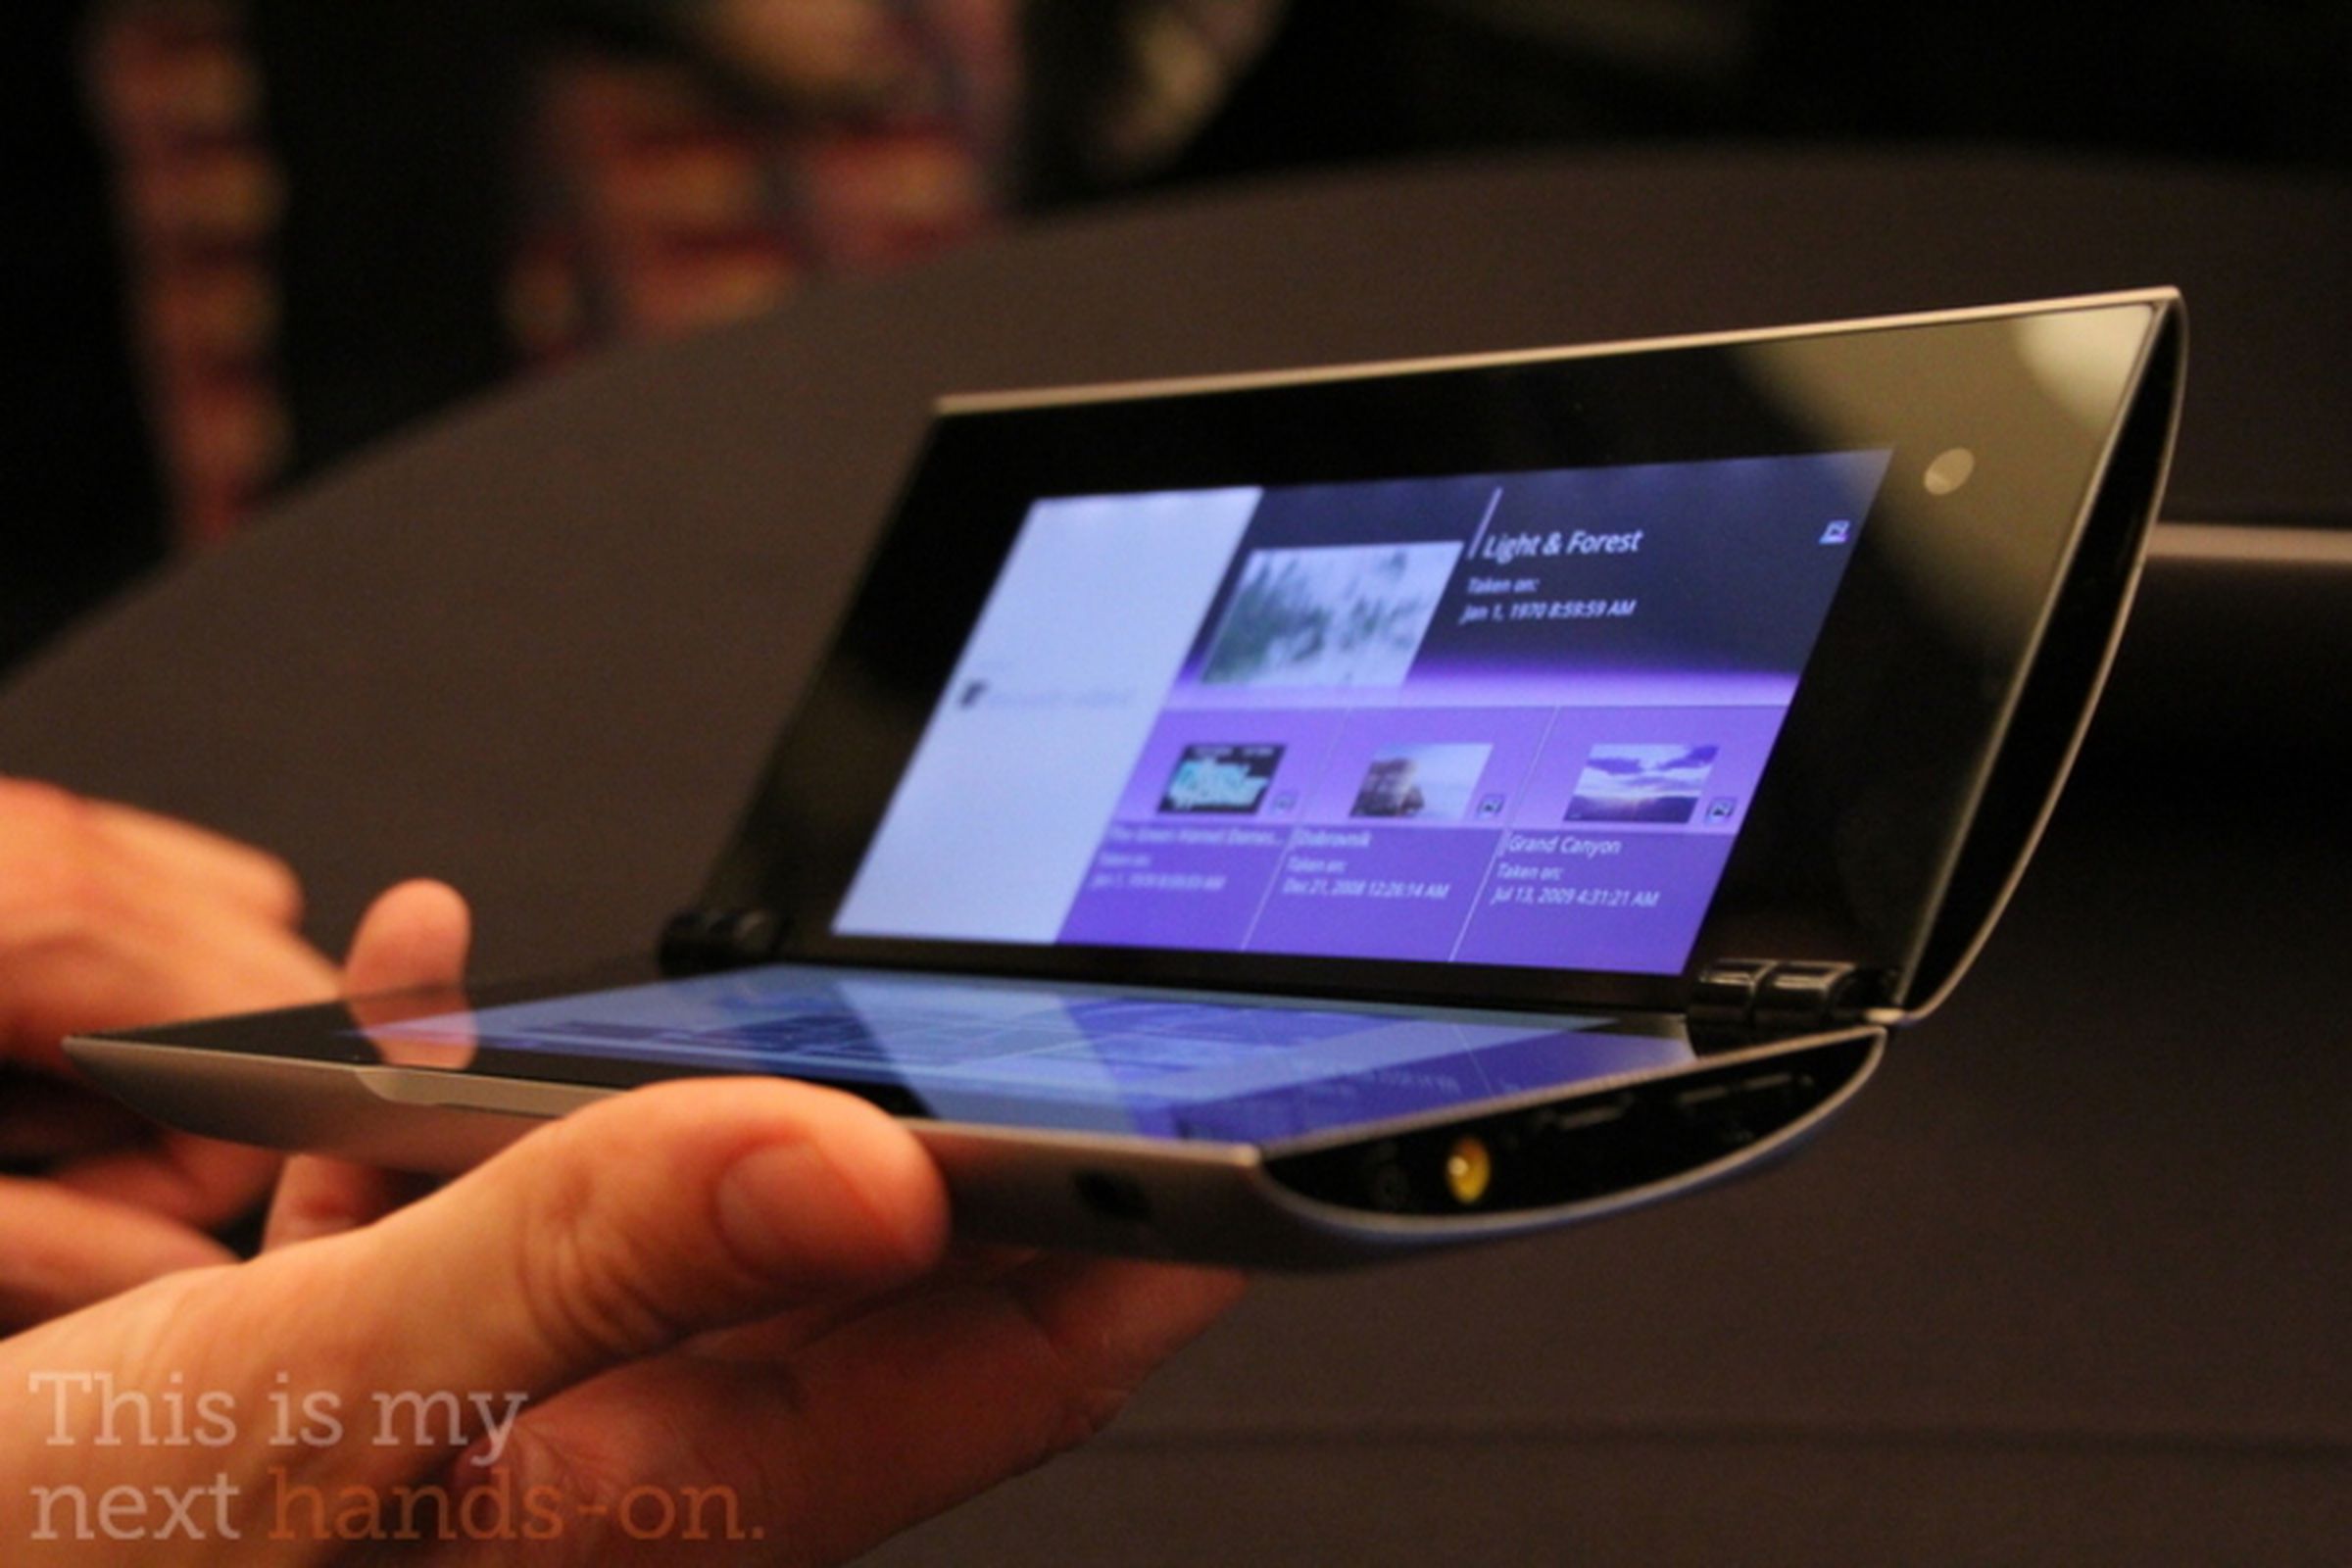 Sony Tablet P hands-on stock